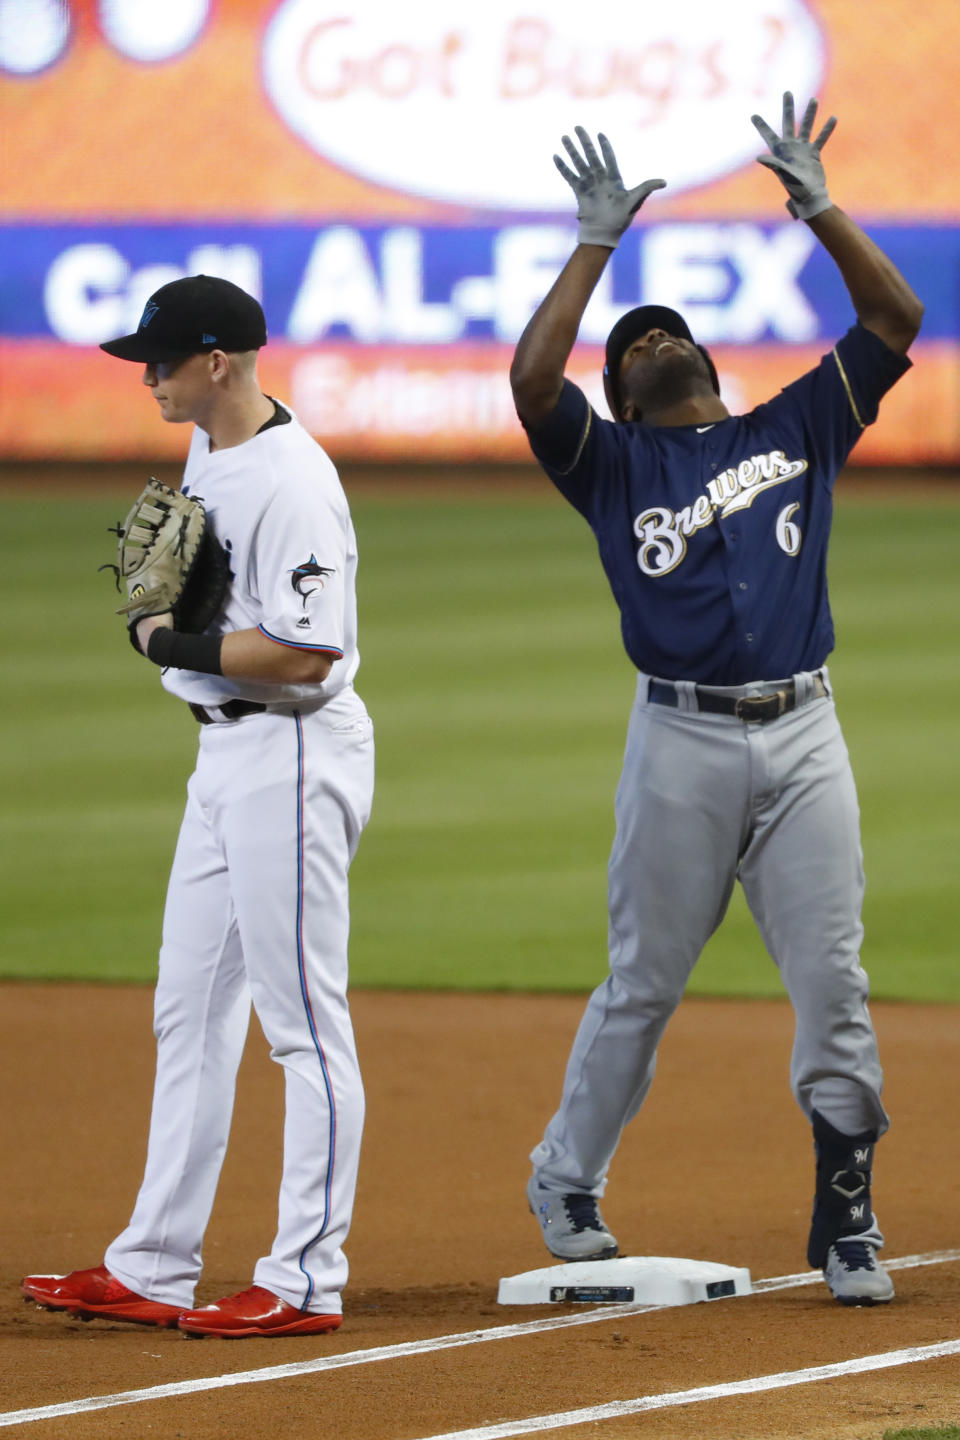 Milwaukee Brewers' Lorenzo Cain (6) celebrates a base hit next to Miami Marlins right fielder Garrett Cooper during the first inning of a baseball game, Thursday, Sept. 12, 2019, in Miami. (AP Photo/Wilfredo Lee)